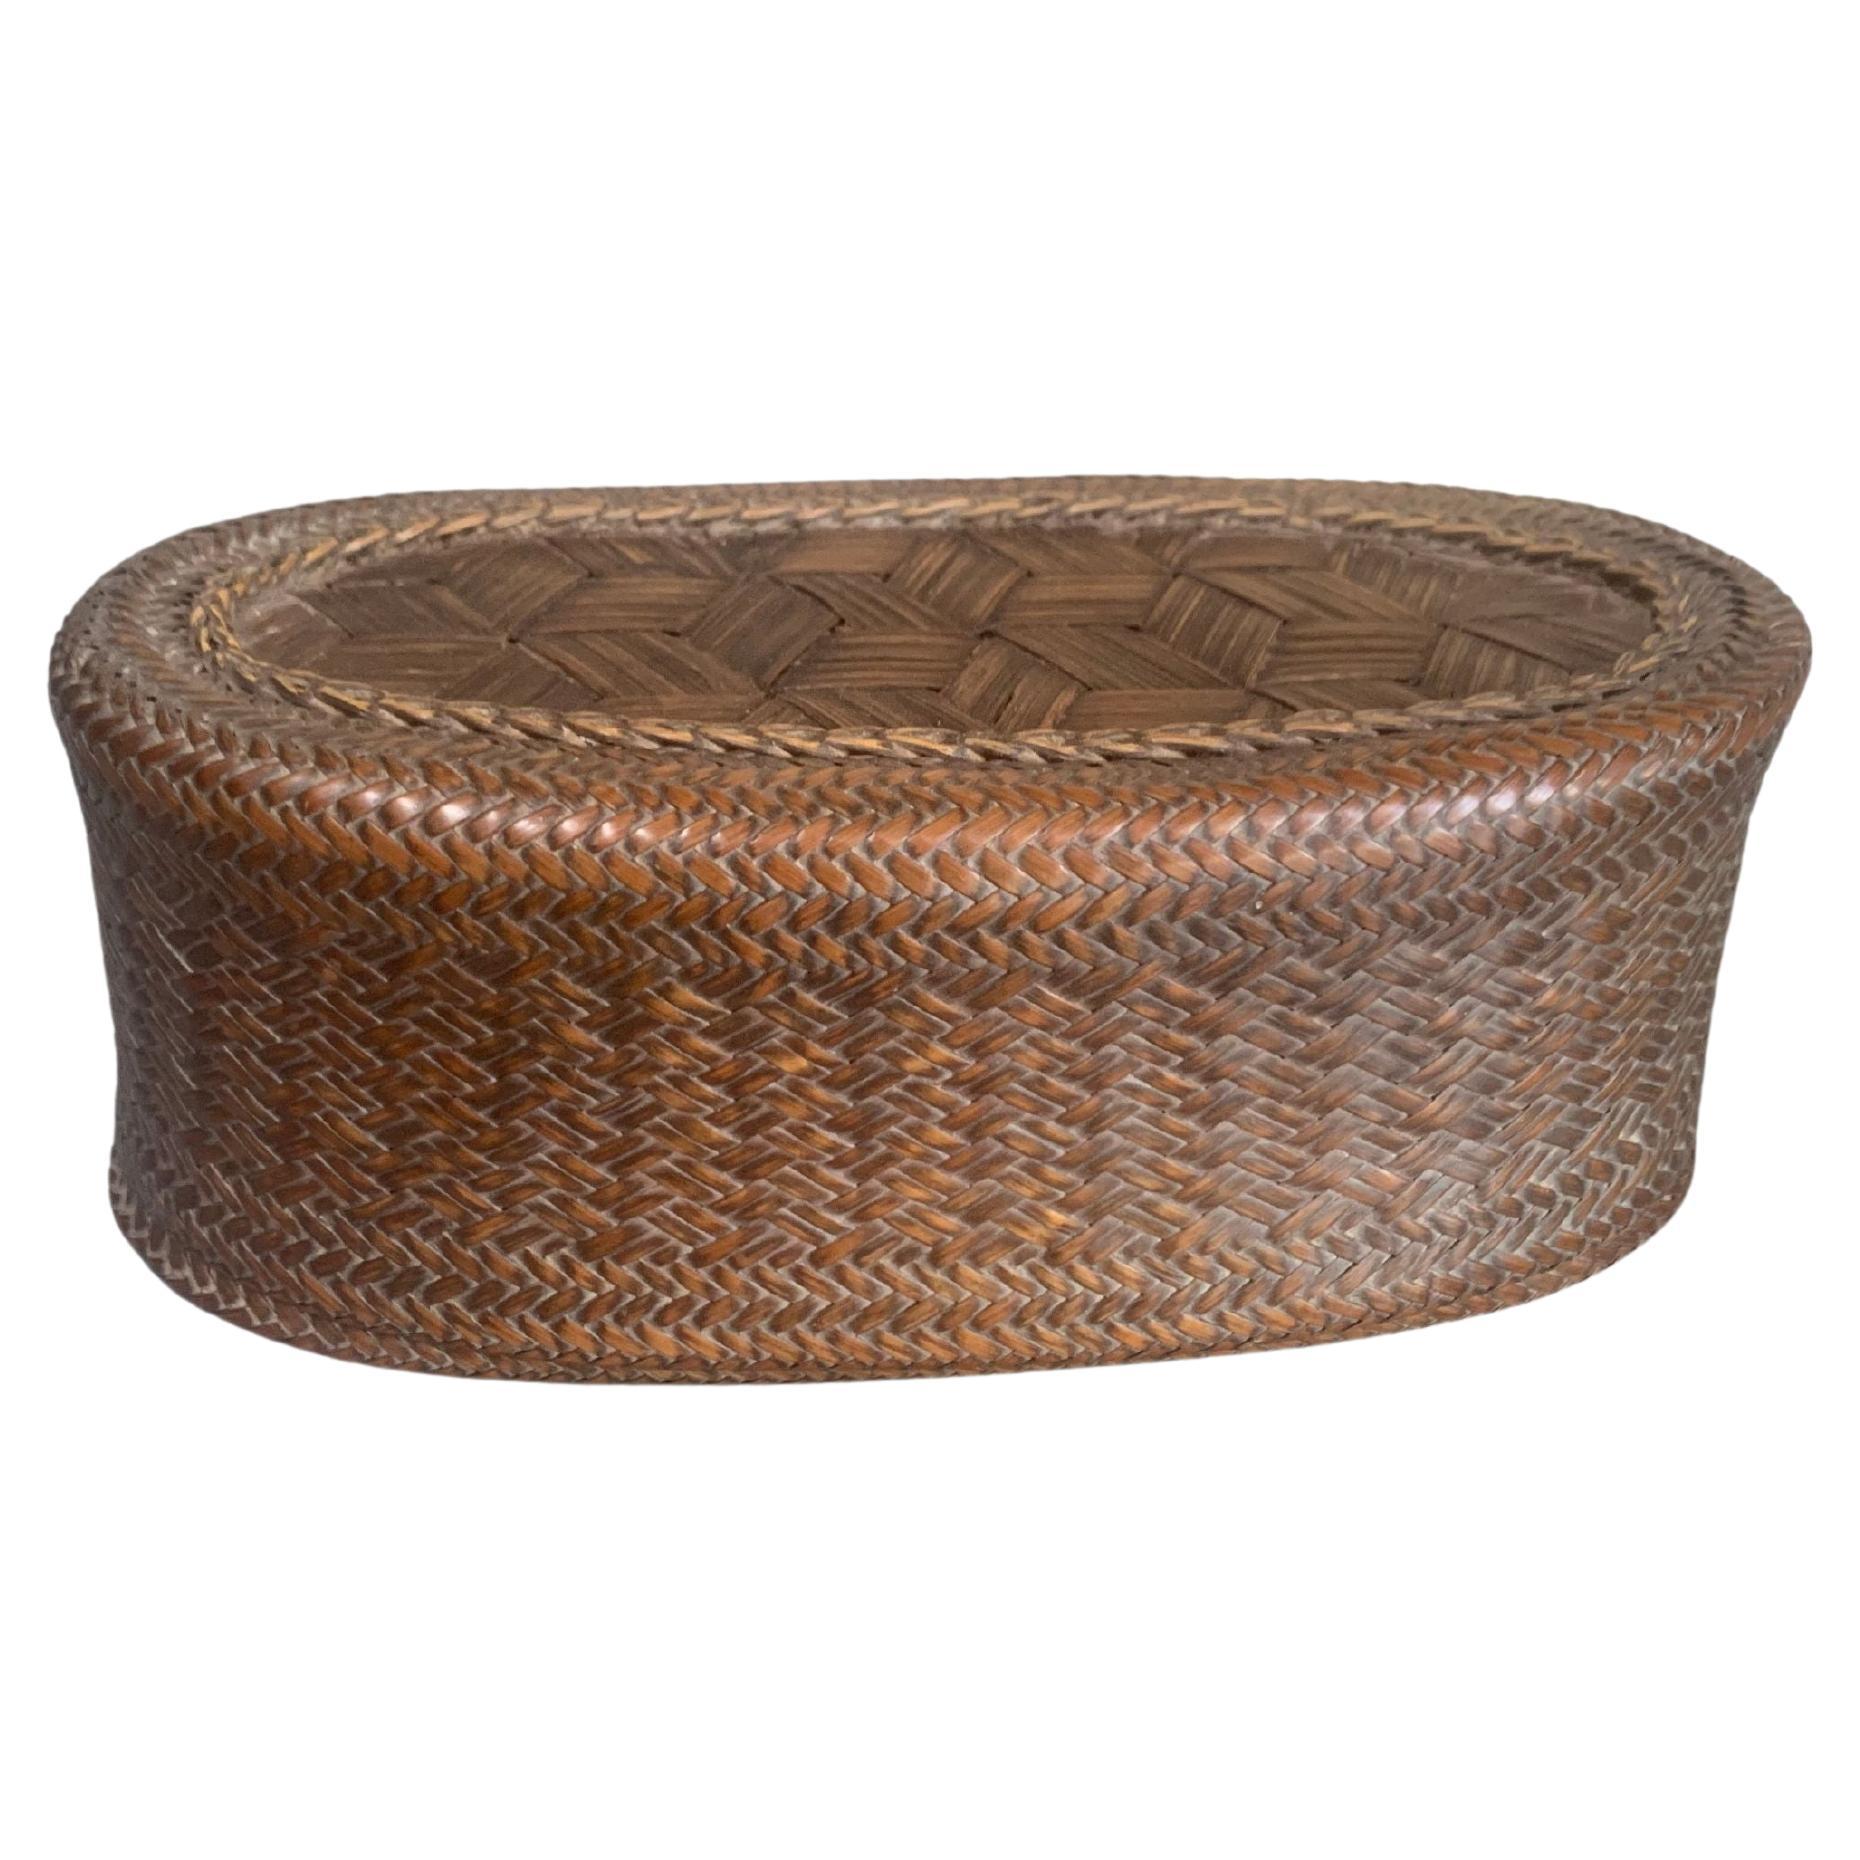 Rattan Spice Basket from Akha Tribe of Northern Thailand For Sale